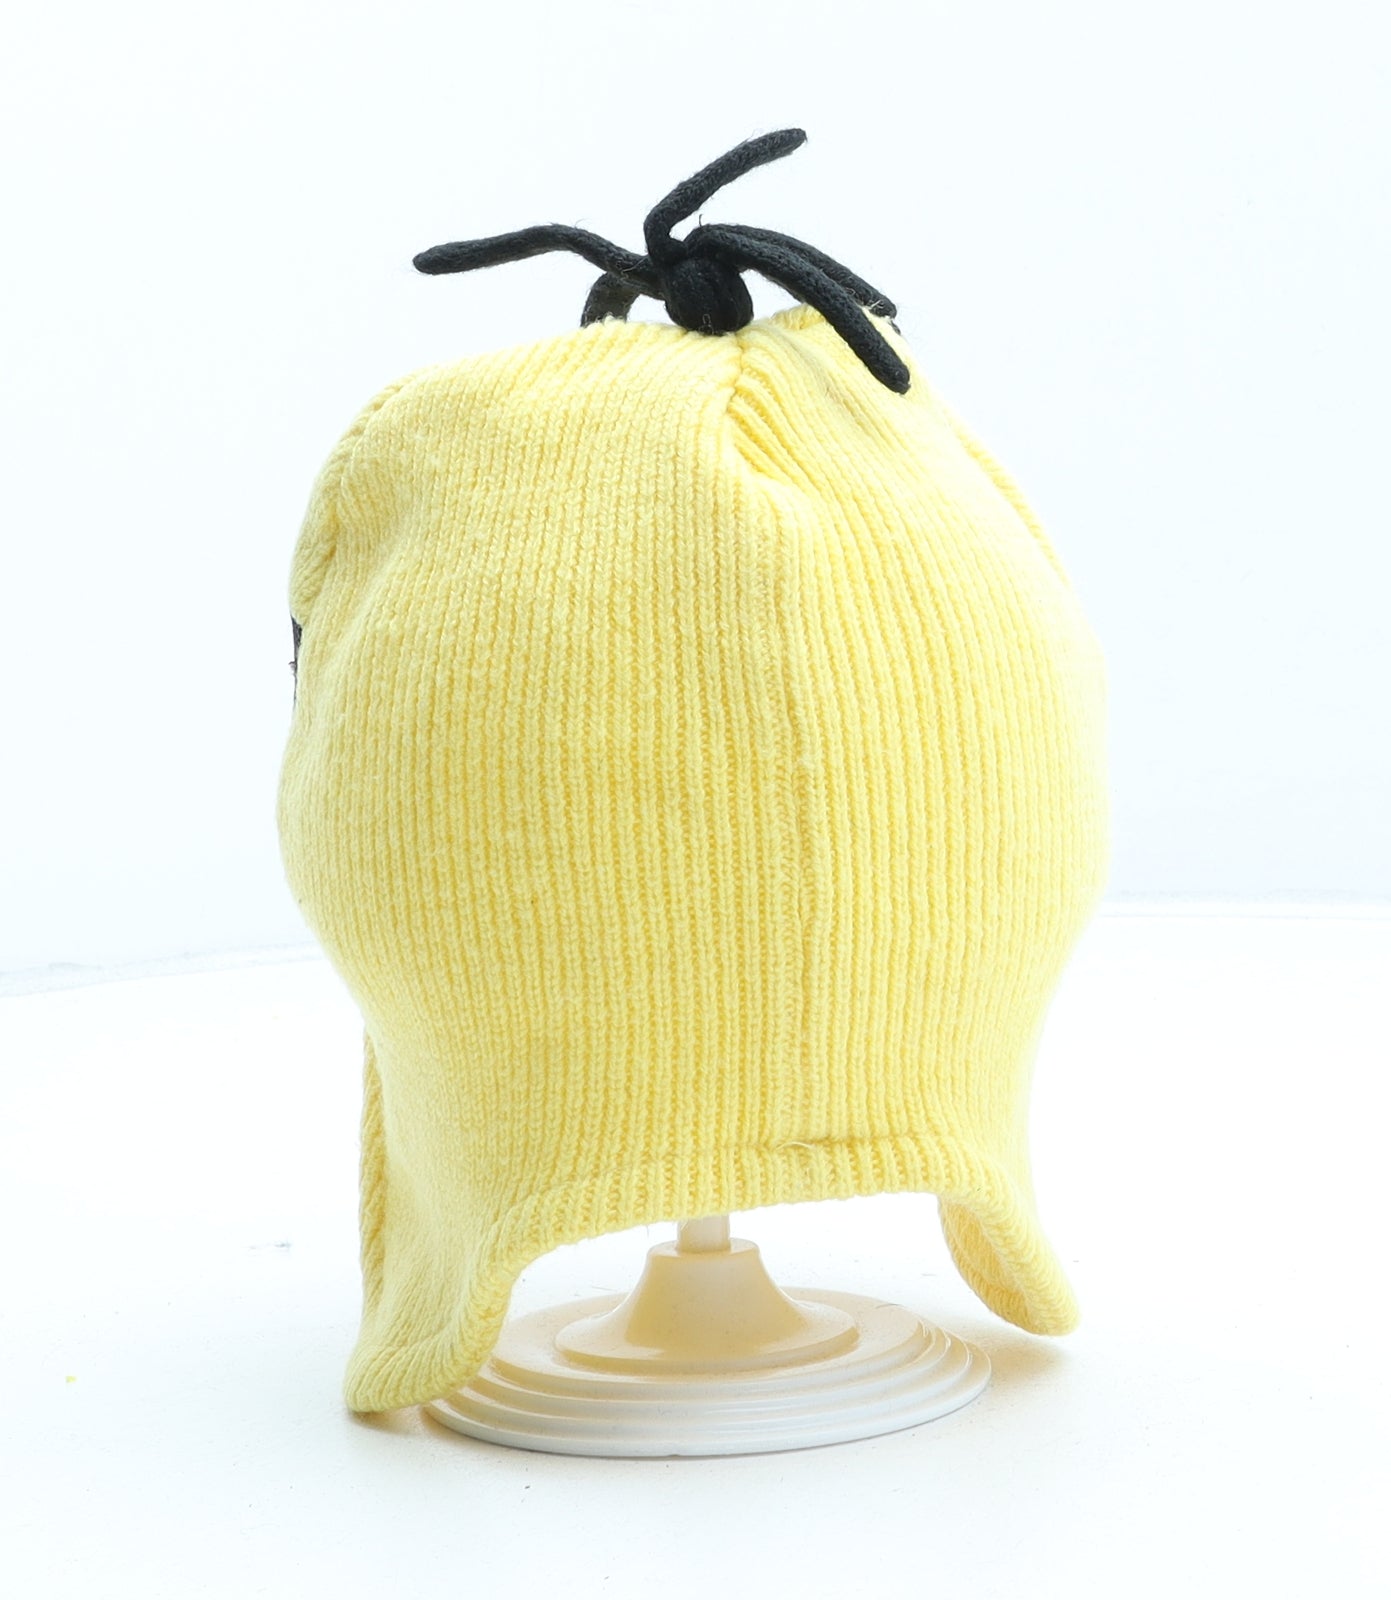 Despicable Me Boys Yellow Acrylic Winter Hat One Size - Minions